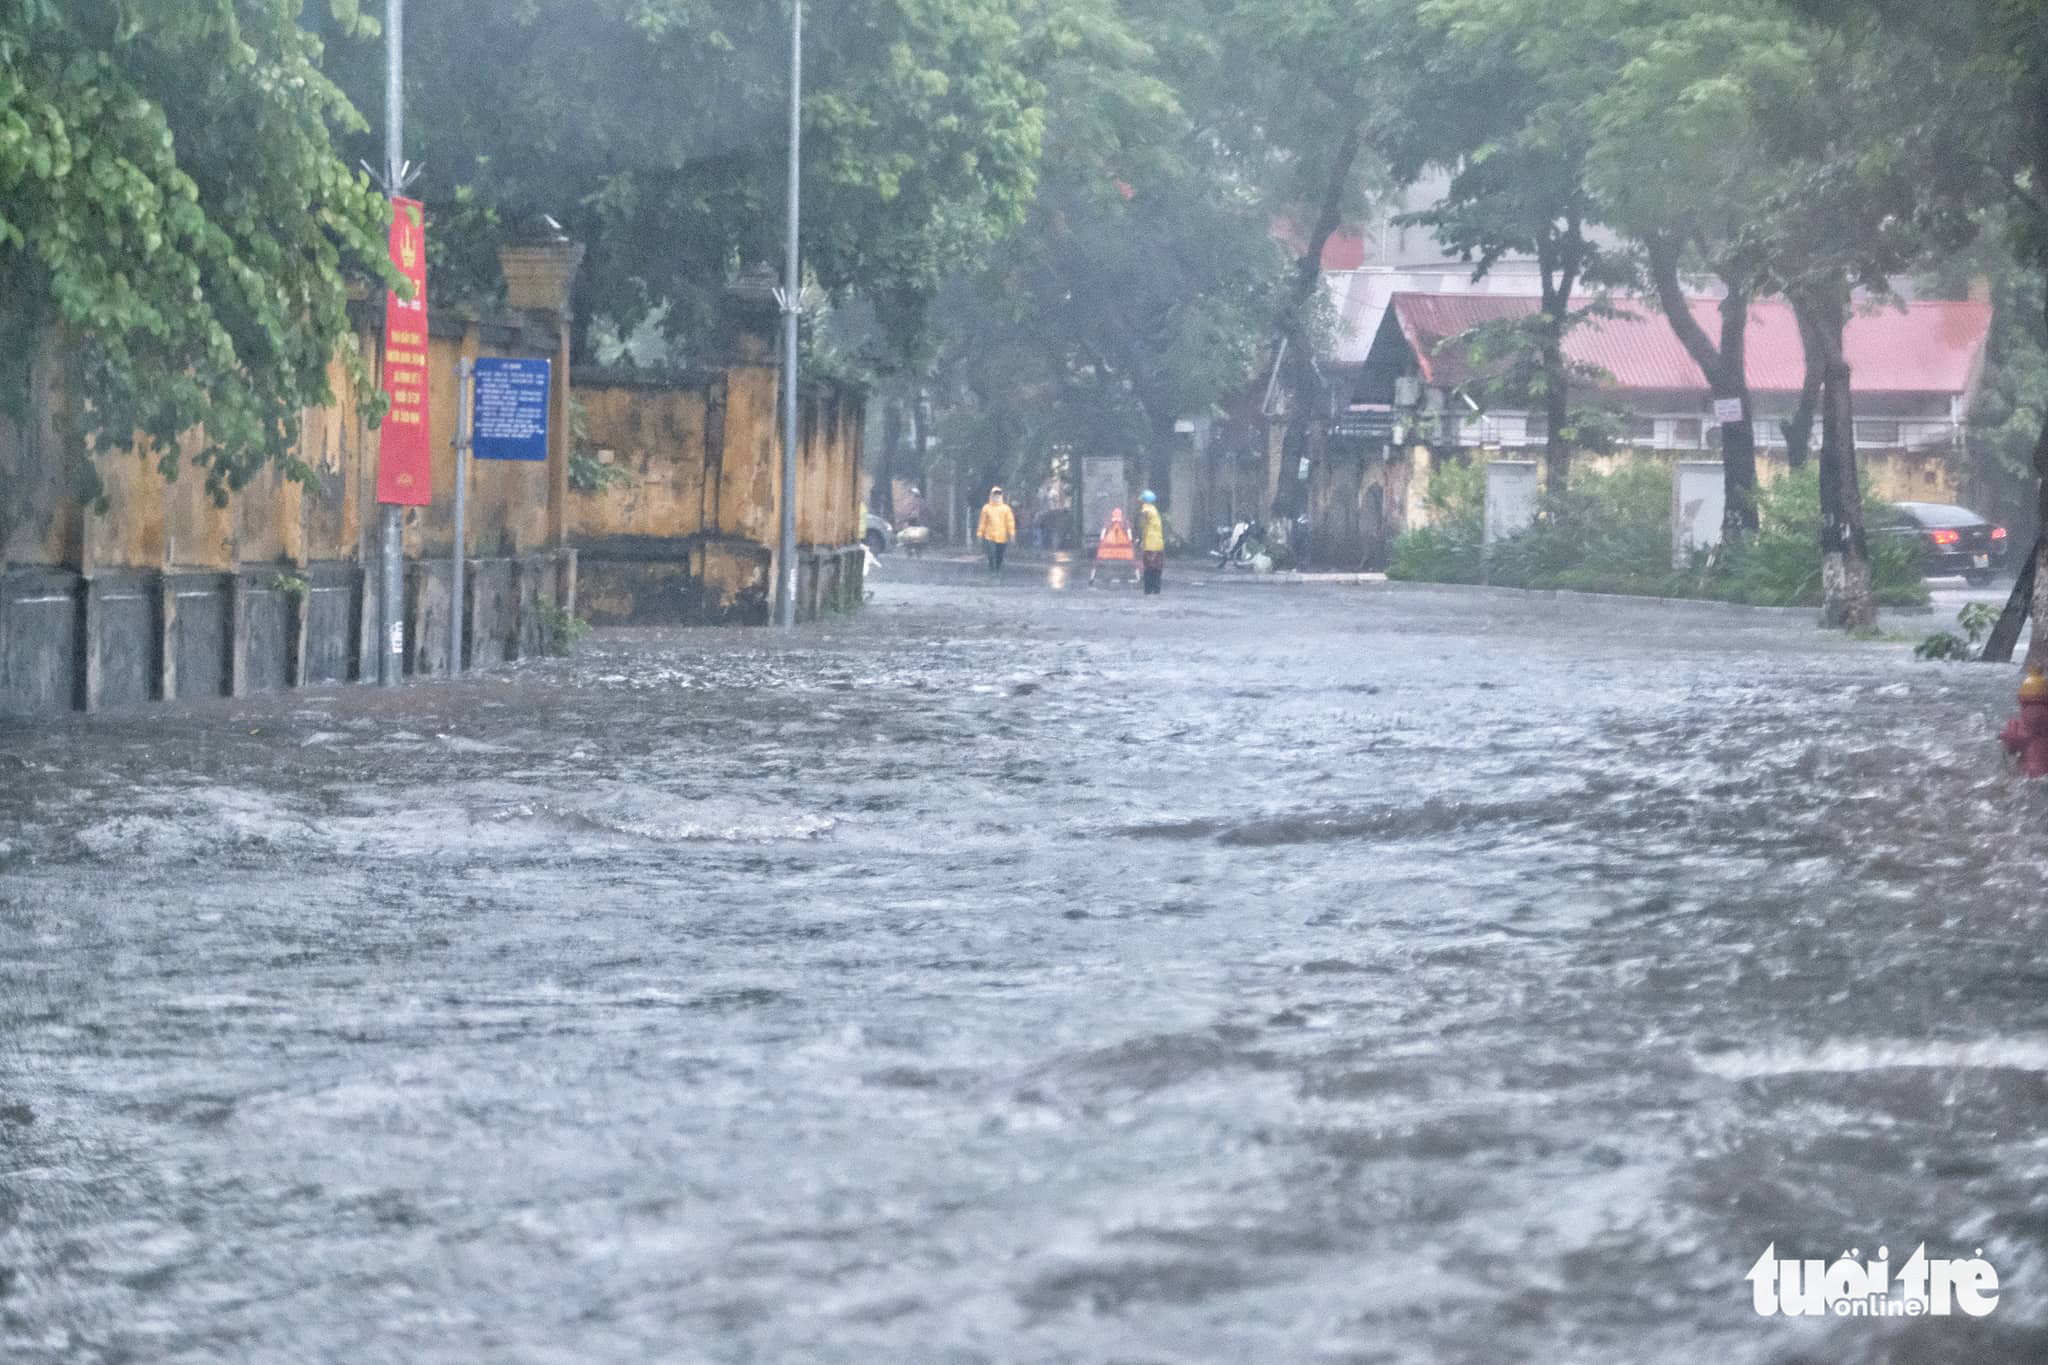 Thuy Khe Street in Hanoi is turned into a river, August 12, 2022. Photo: Pham Nam Tran / Tuoi Tre